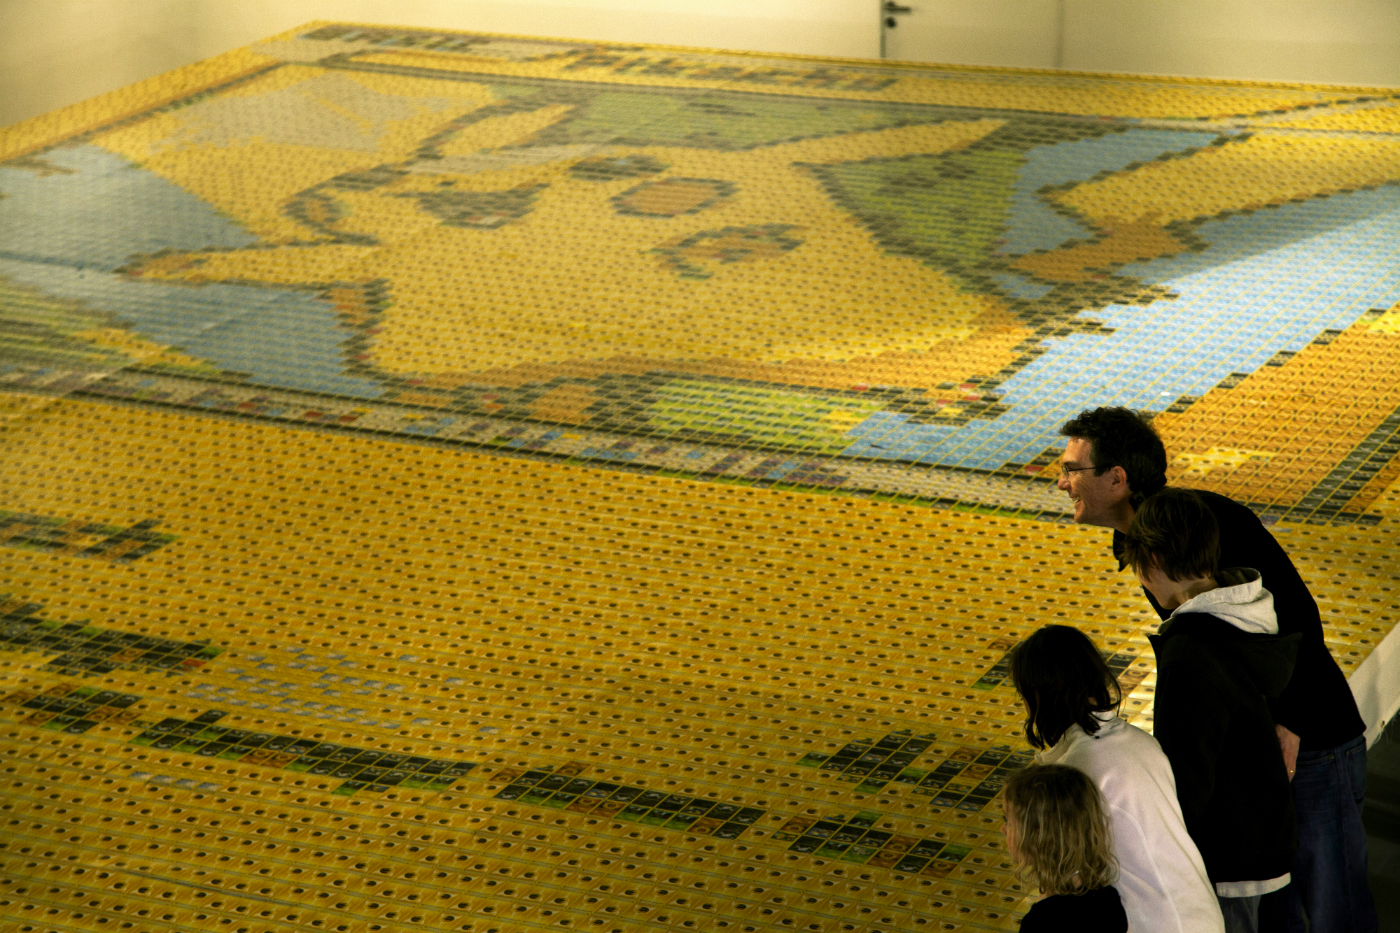 The world's largest Pokemon card is actually 13,000 cards in one